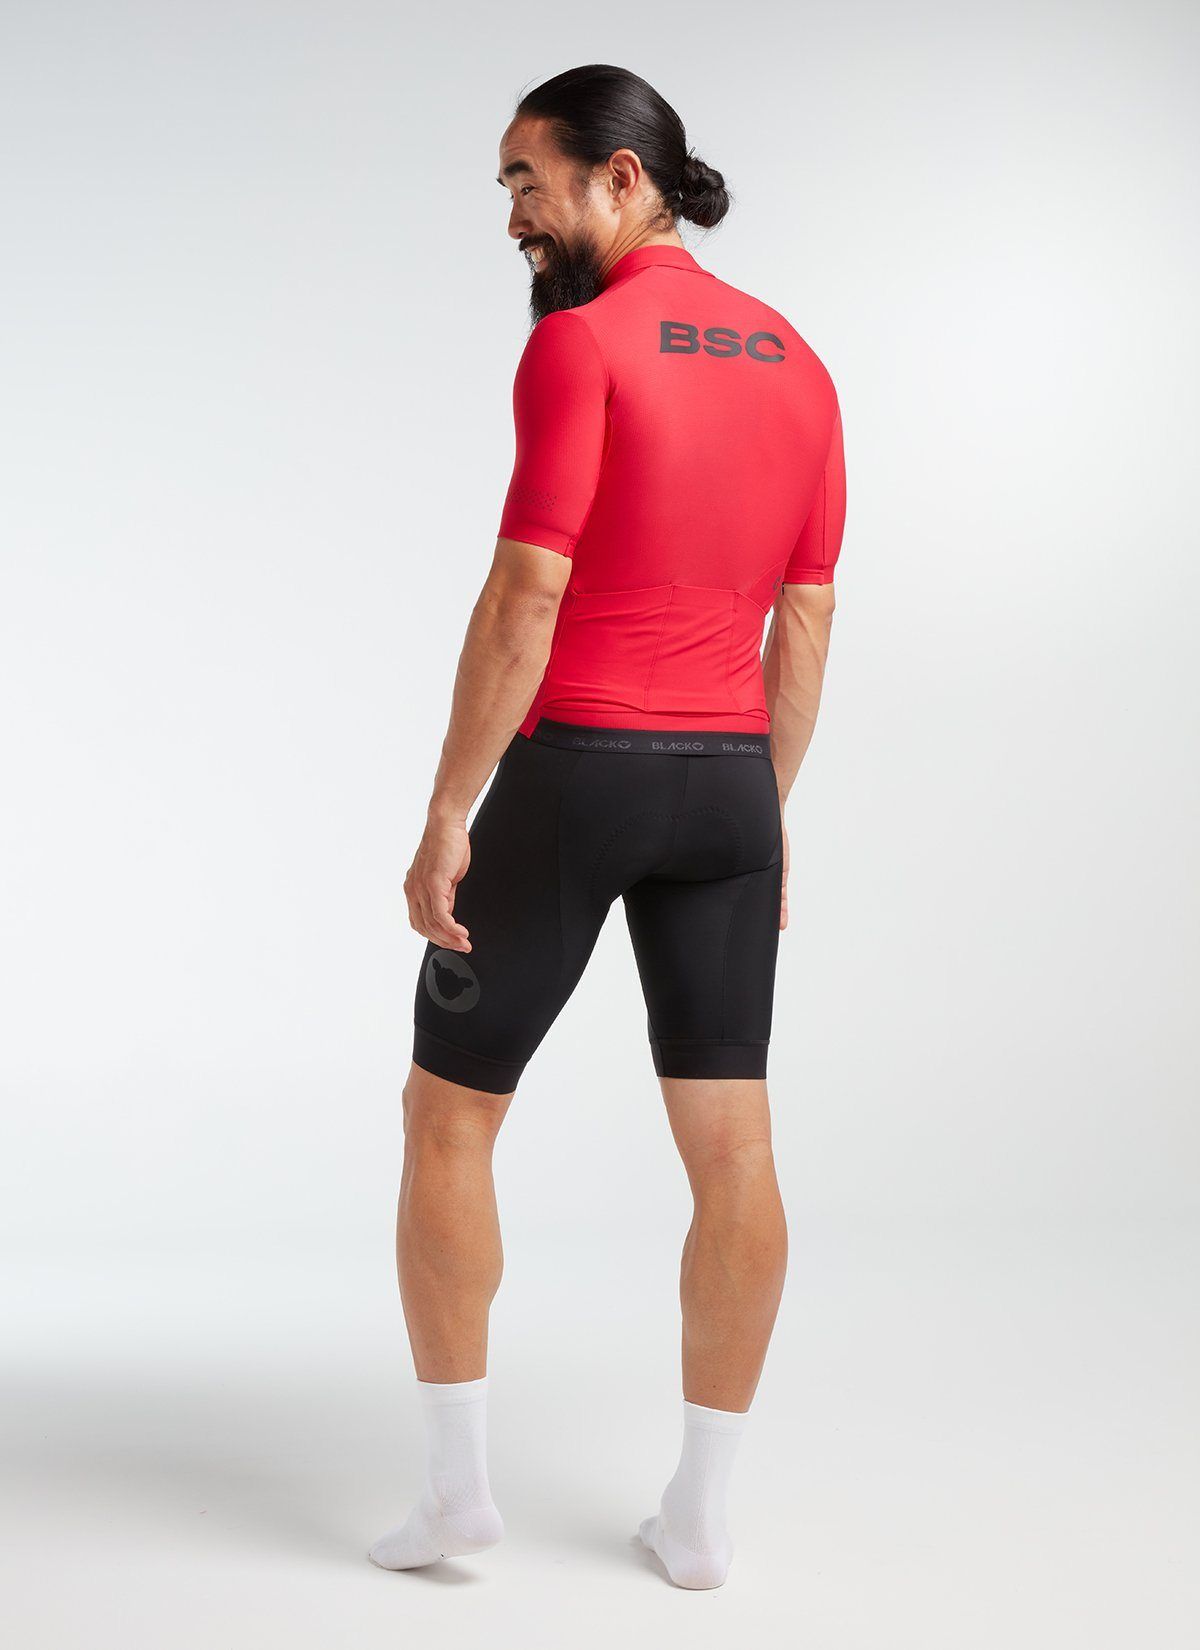 Men's Elements SS Thermal Jersey - Jester Red